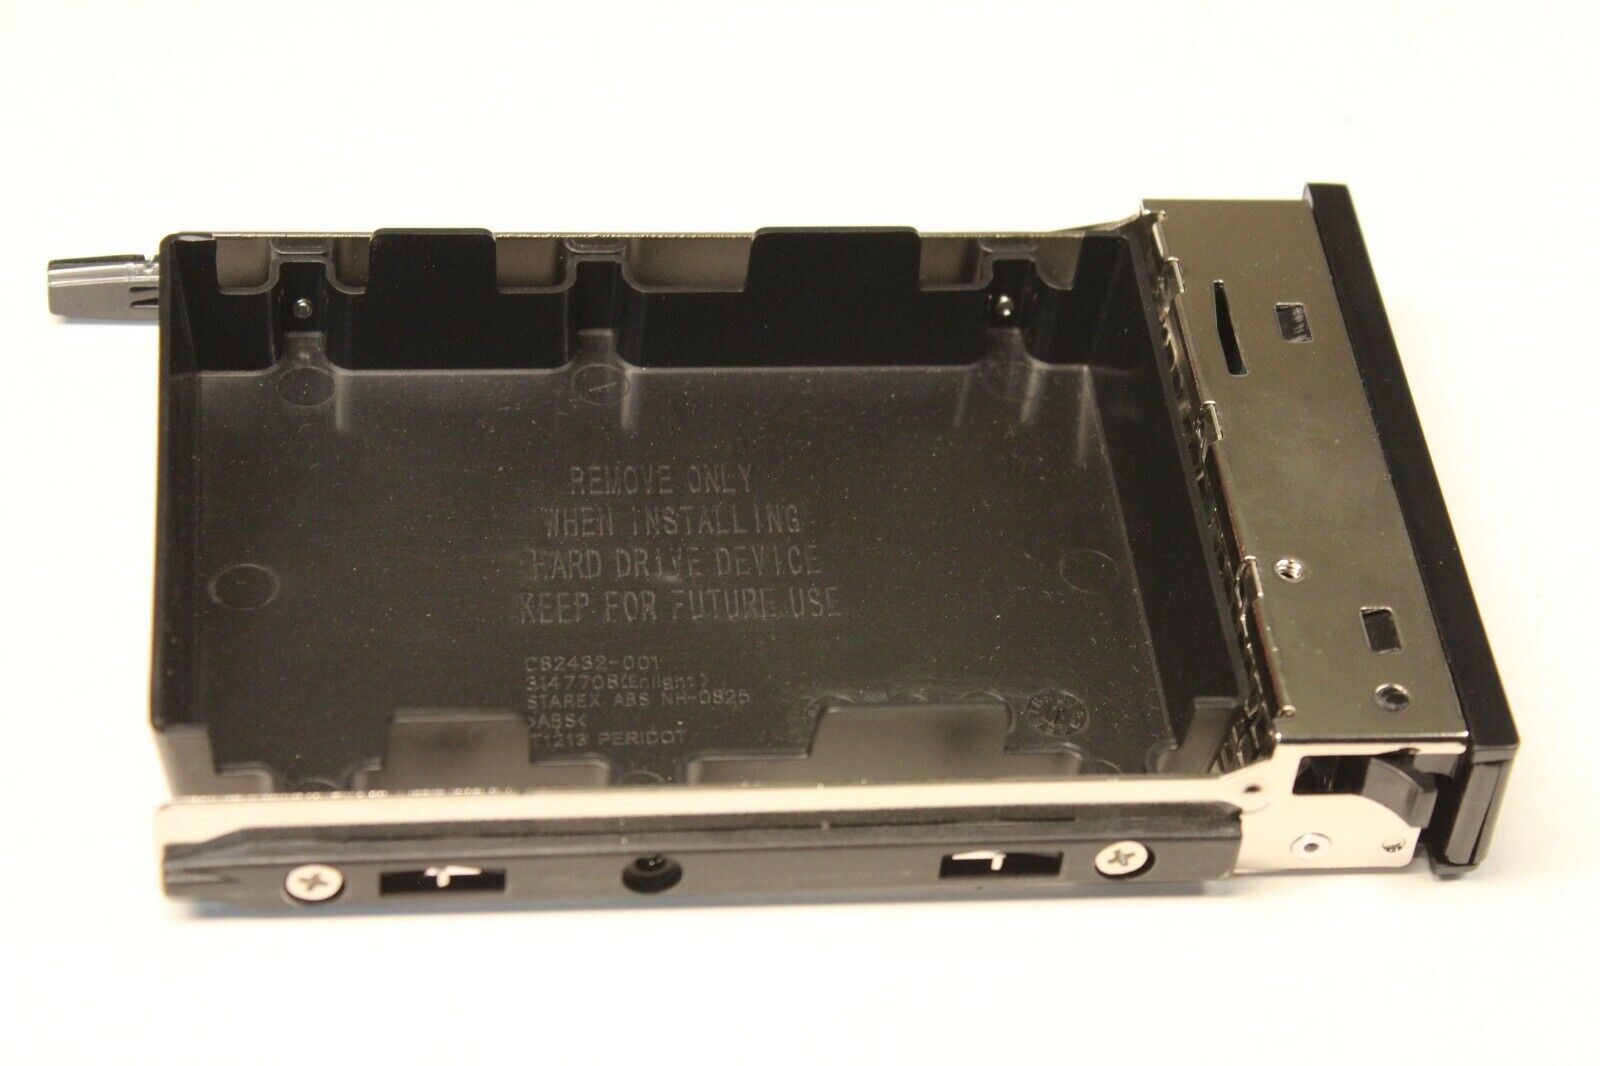 AXXHDDCR07 INTEL C82432-001 Hotswap Drive Carrier  New Pull